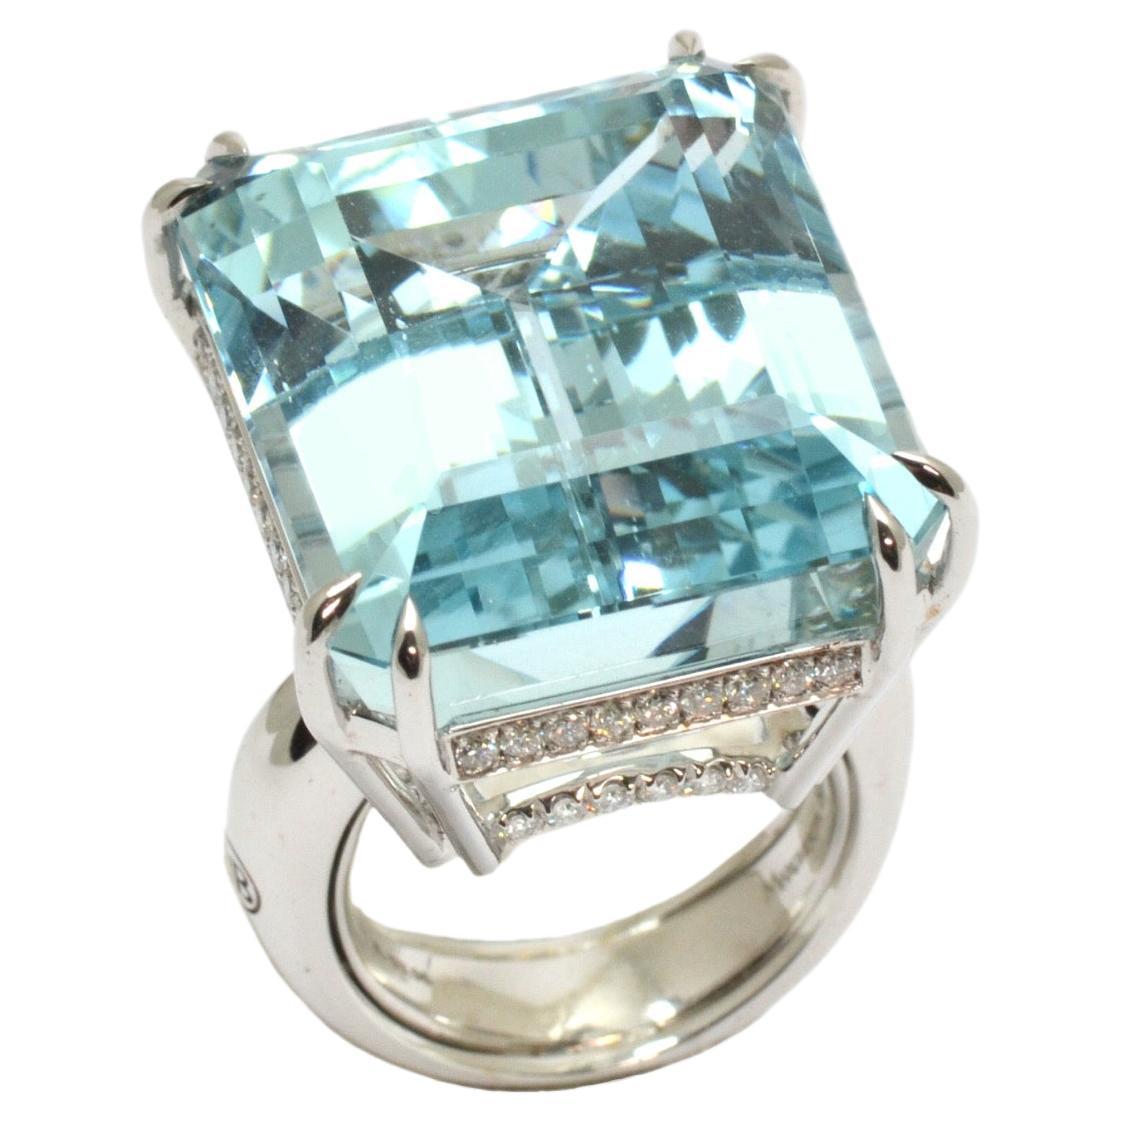 Aquamarine Diamond 18 KT White Gold Made in Italy Cocktail Ring